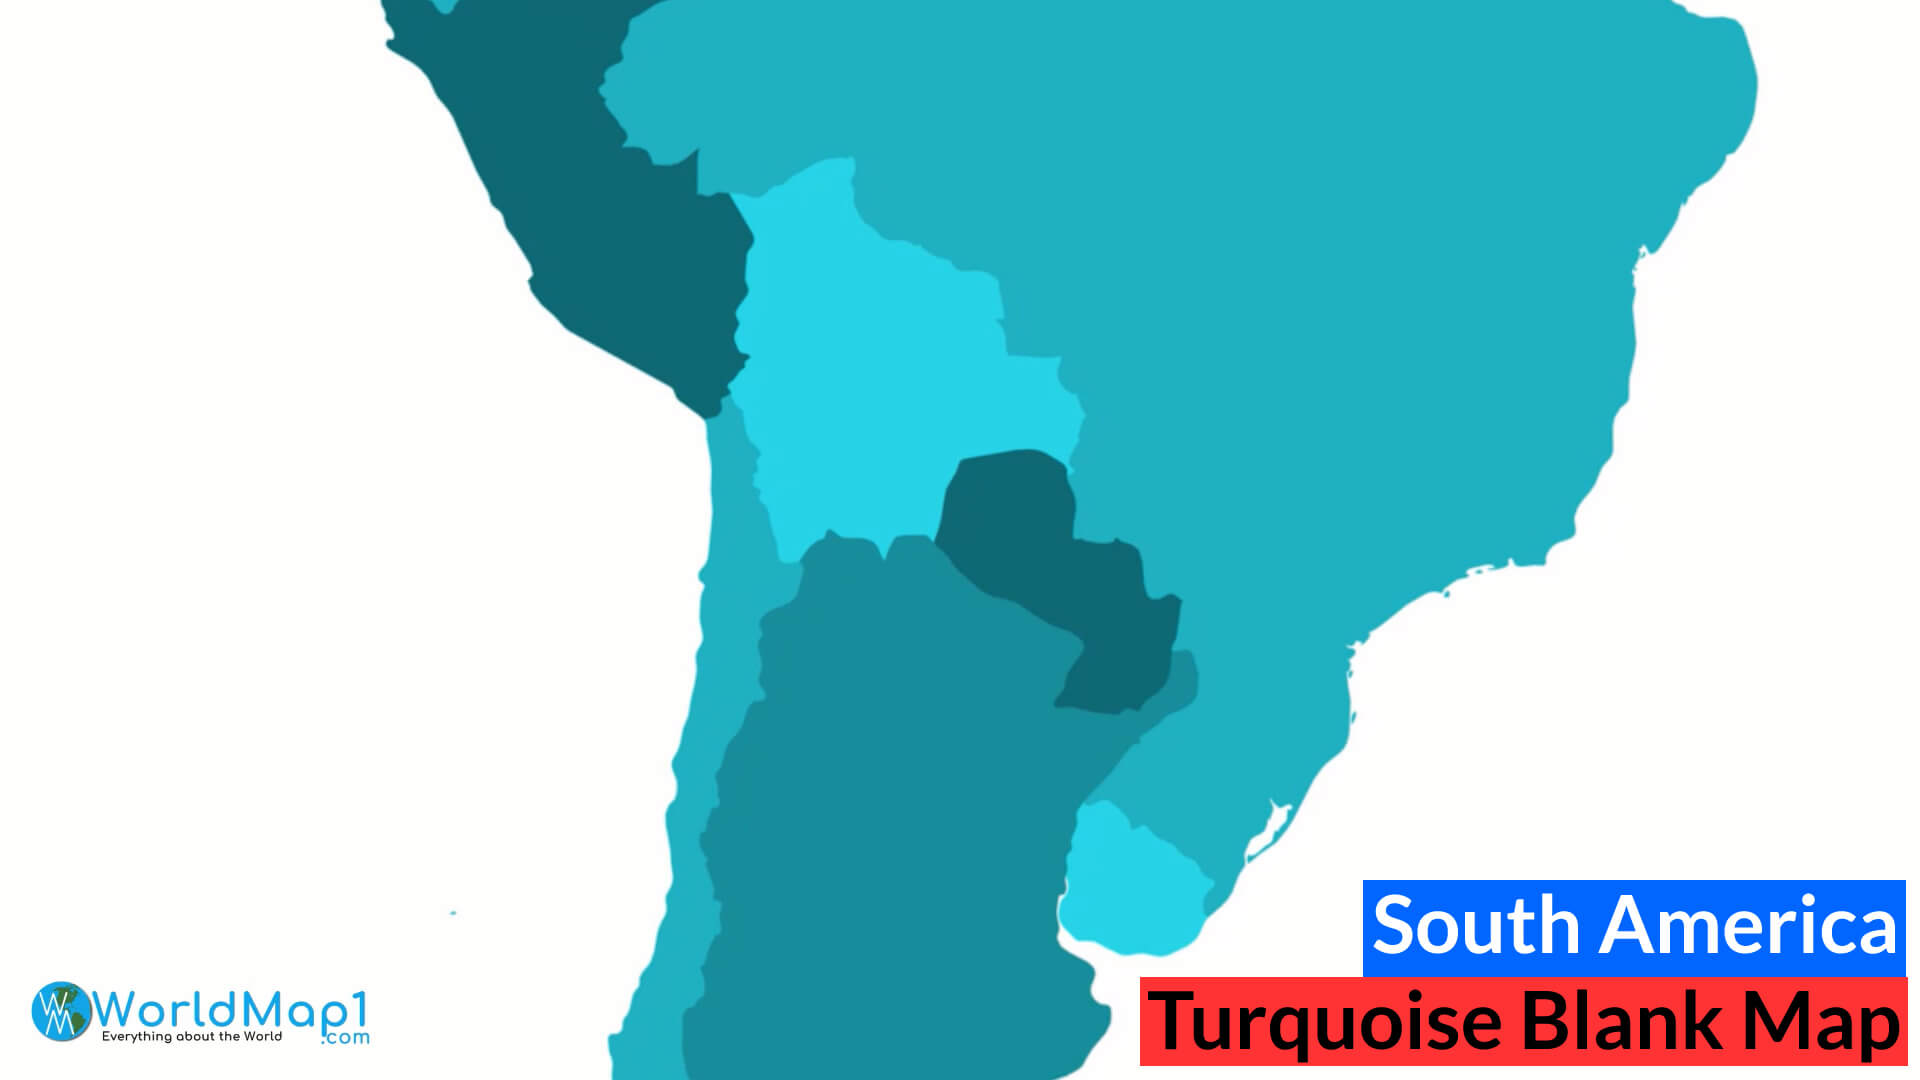 Turquoise Blank Map of South America